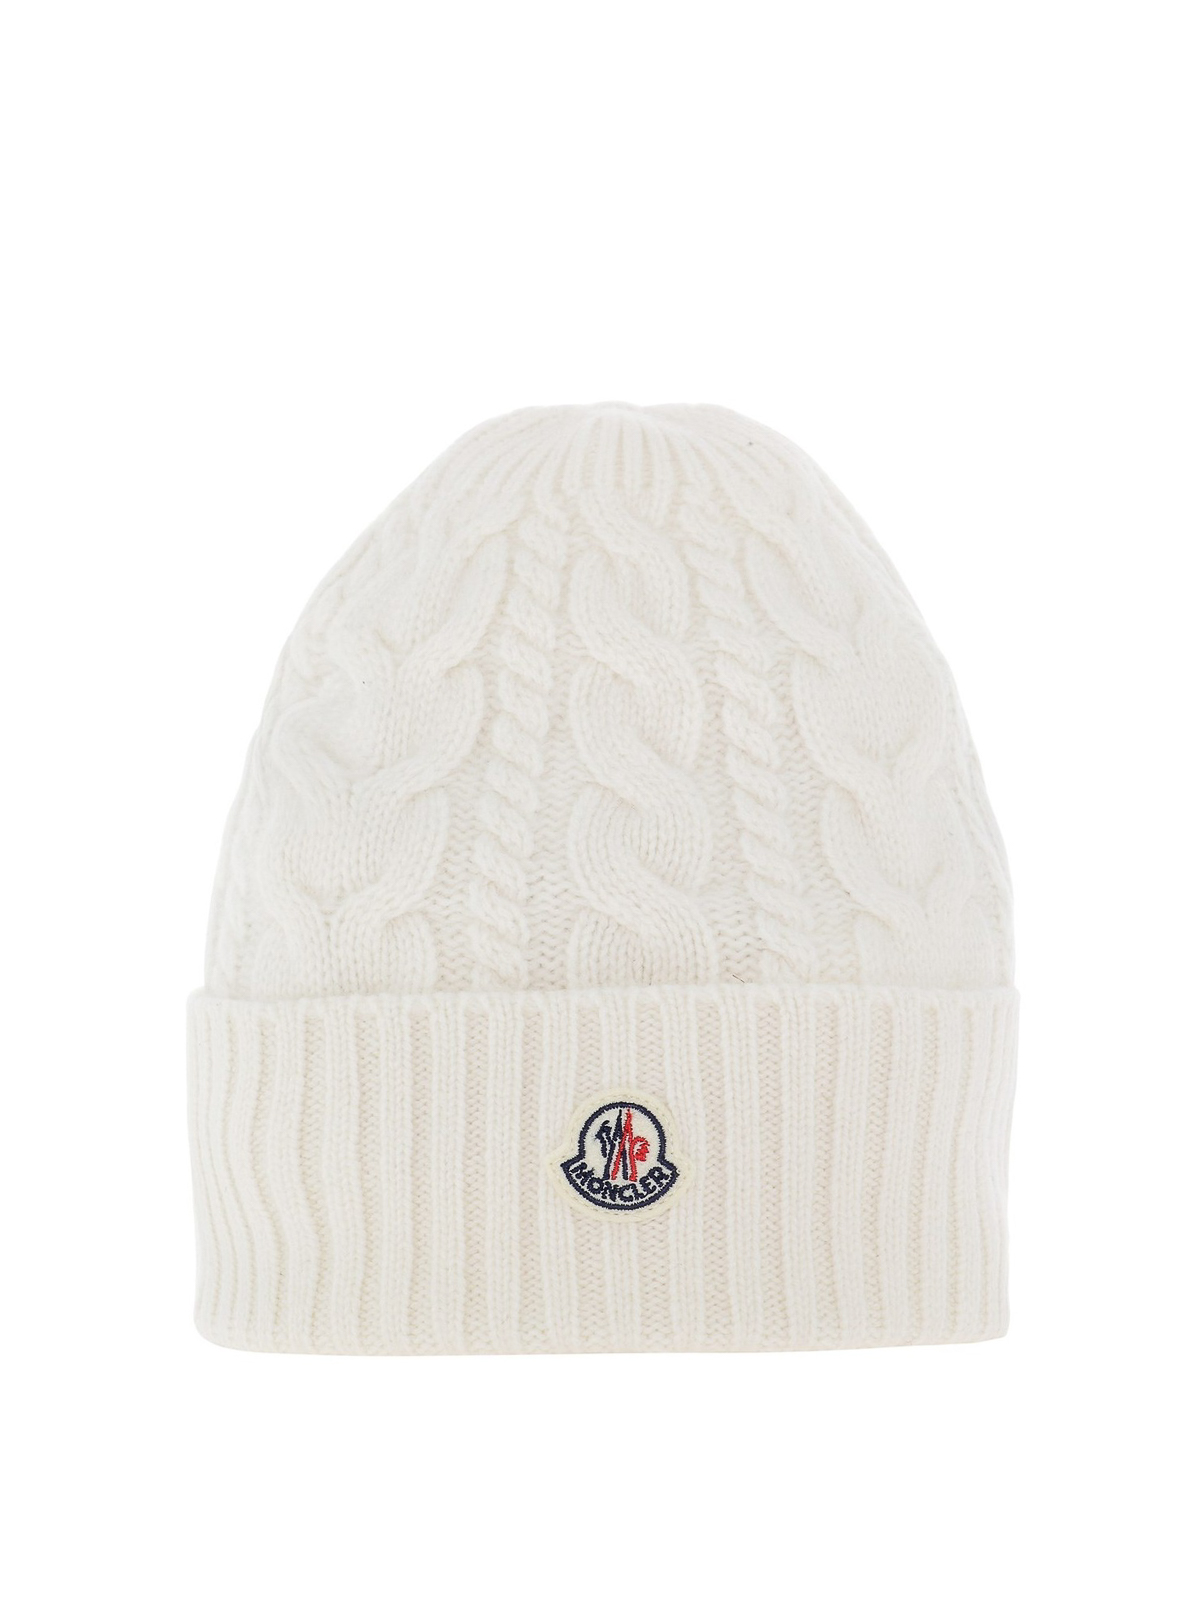 Beanies Moncler - Cable knit beanie - 9Z70300A9328002 | iKRIX.com